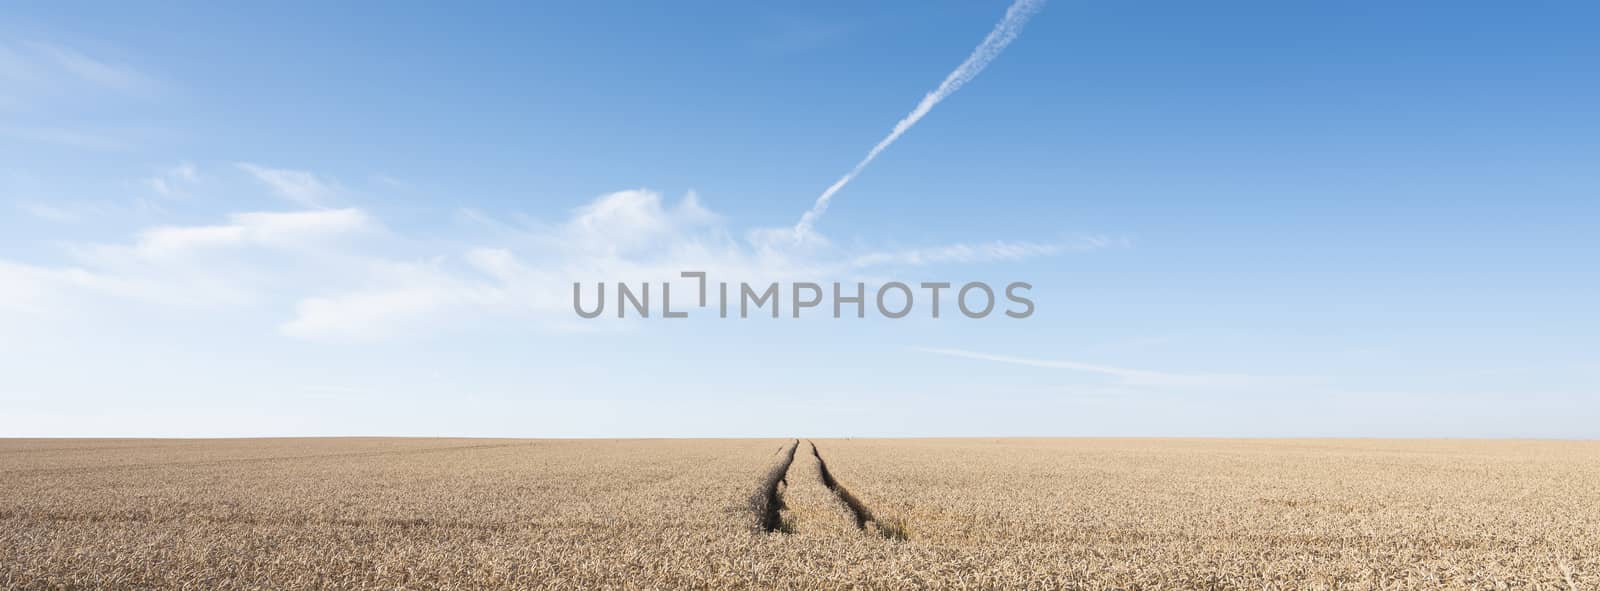 tracks in vast expanse of wheat crop in french field under blue sky